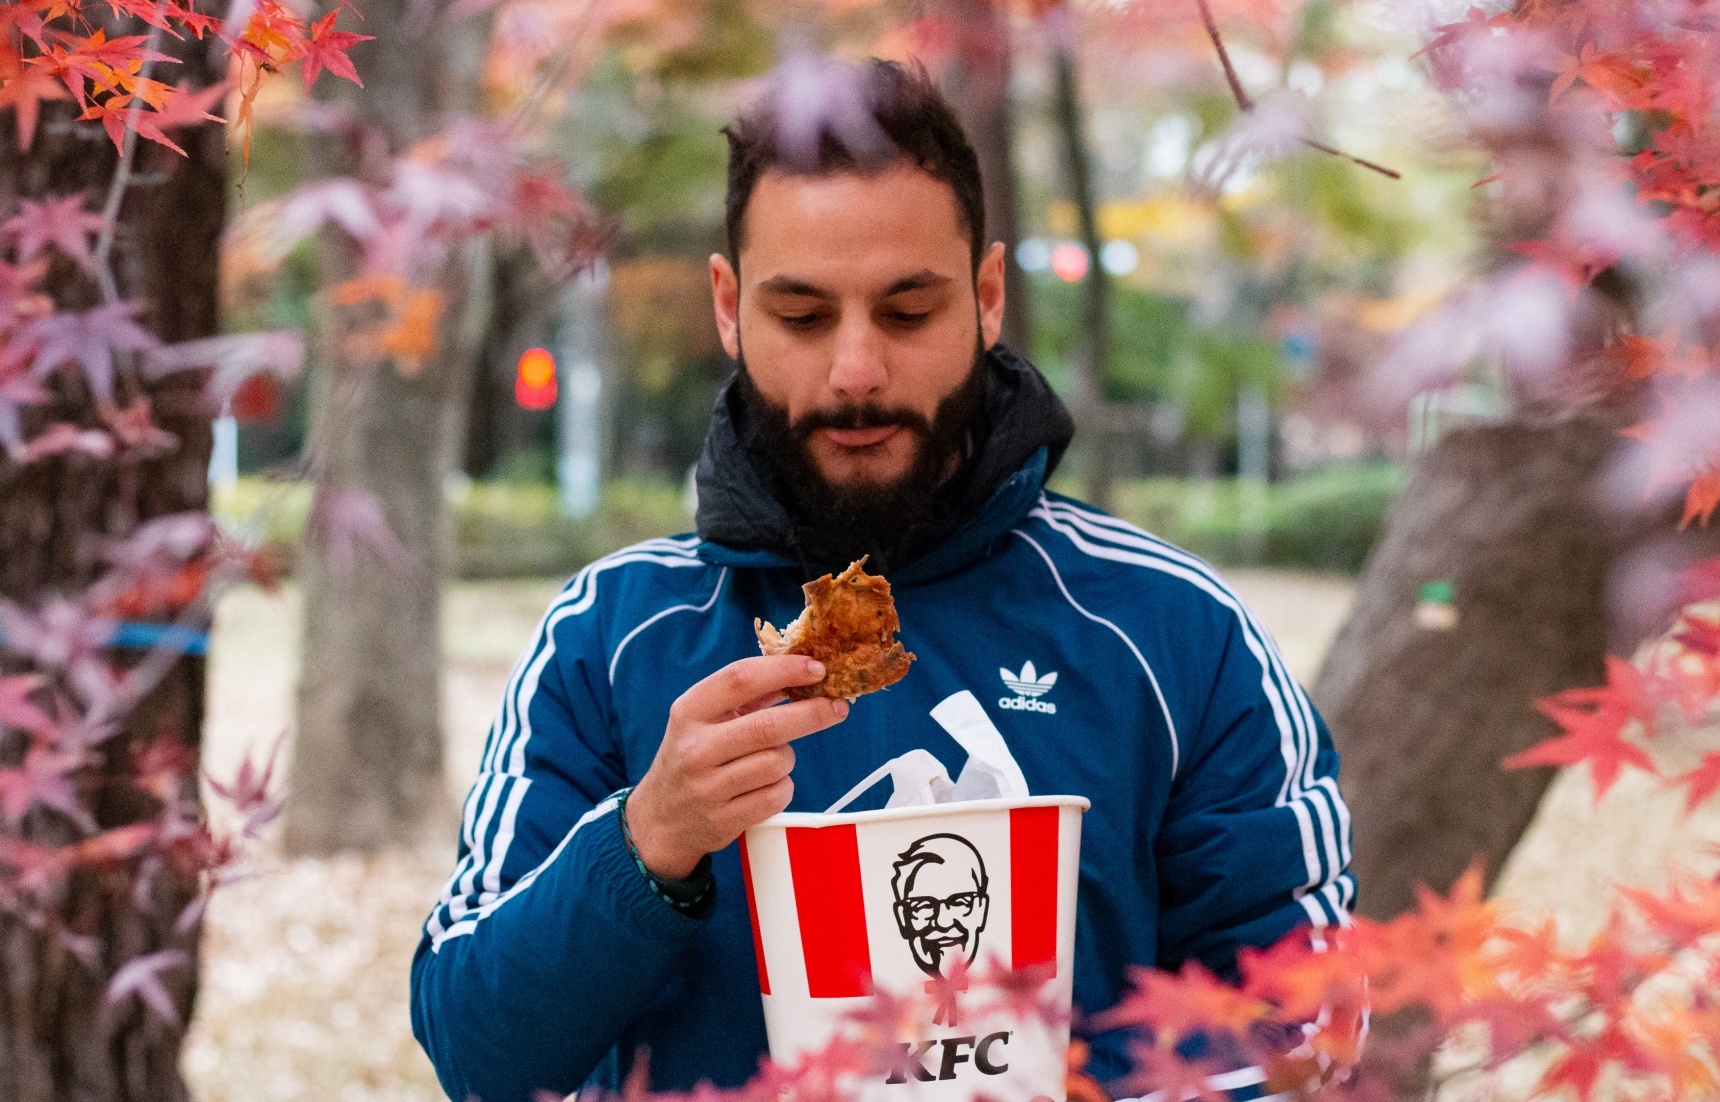 I Spent a Week Eating Nothing but KFC Chicken